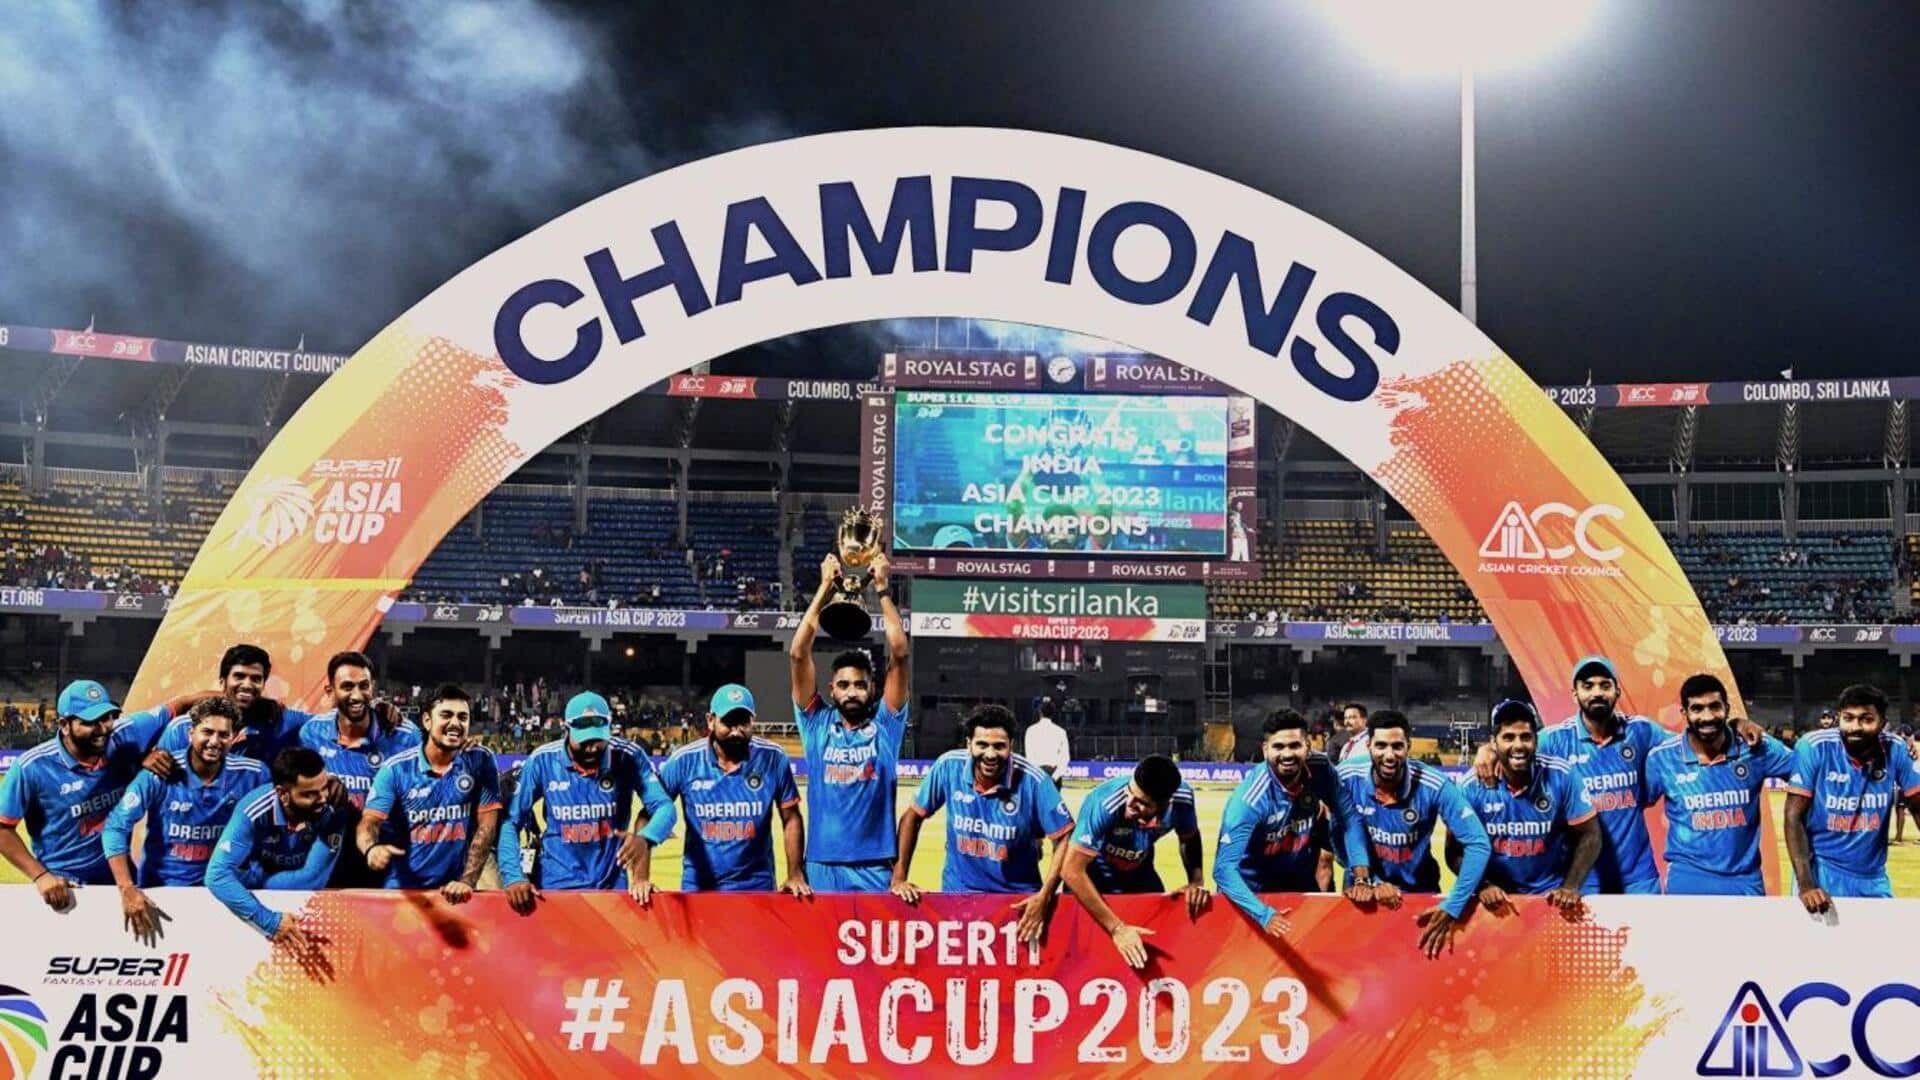 Asia Cup 2023: Key takeaways from India's campaign